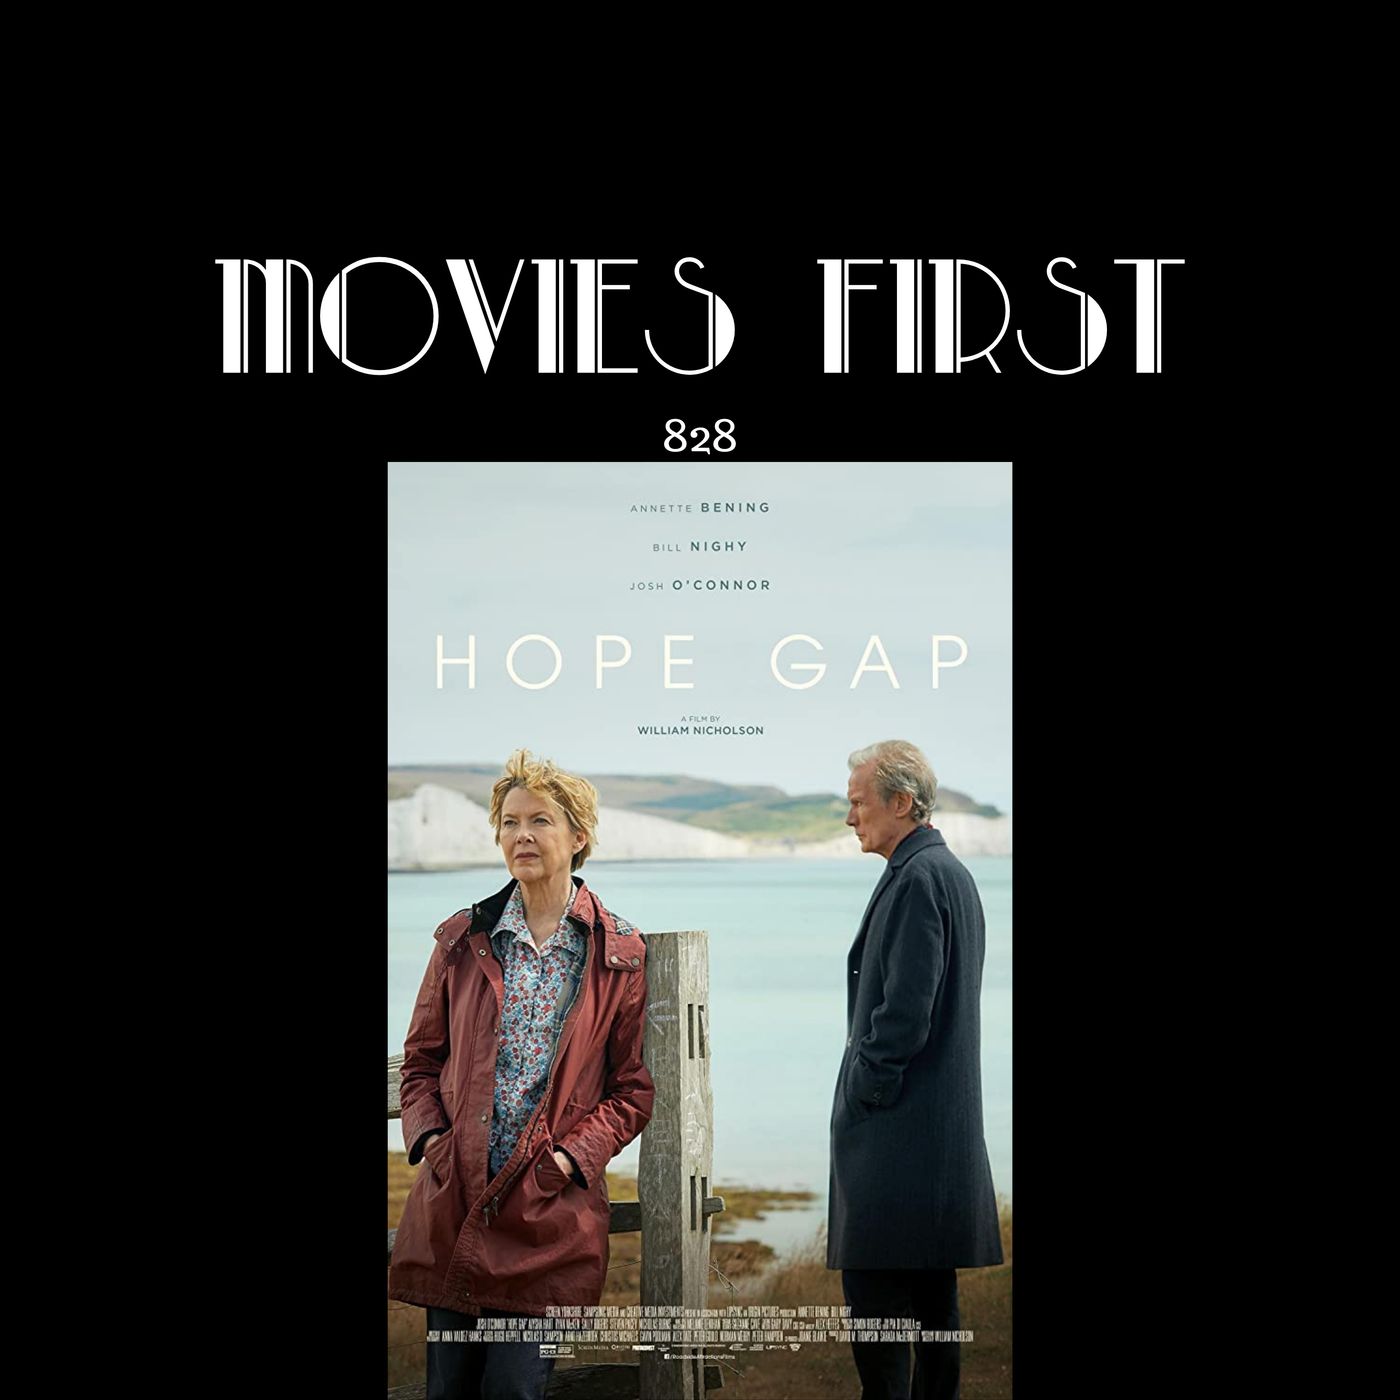 Hope Gap (Drama, Romance) (the @MoviesFirst review)